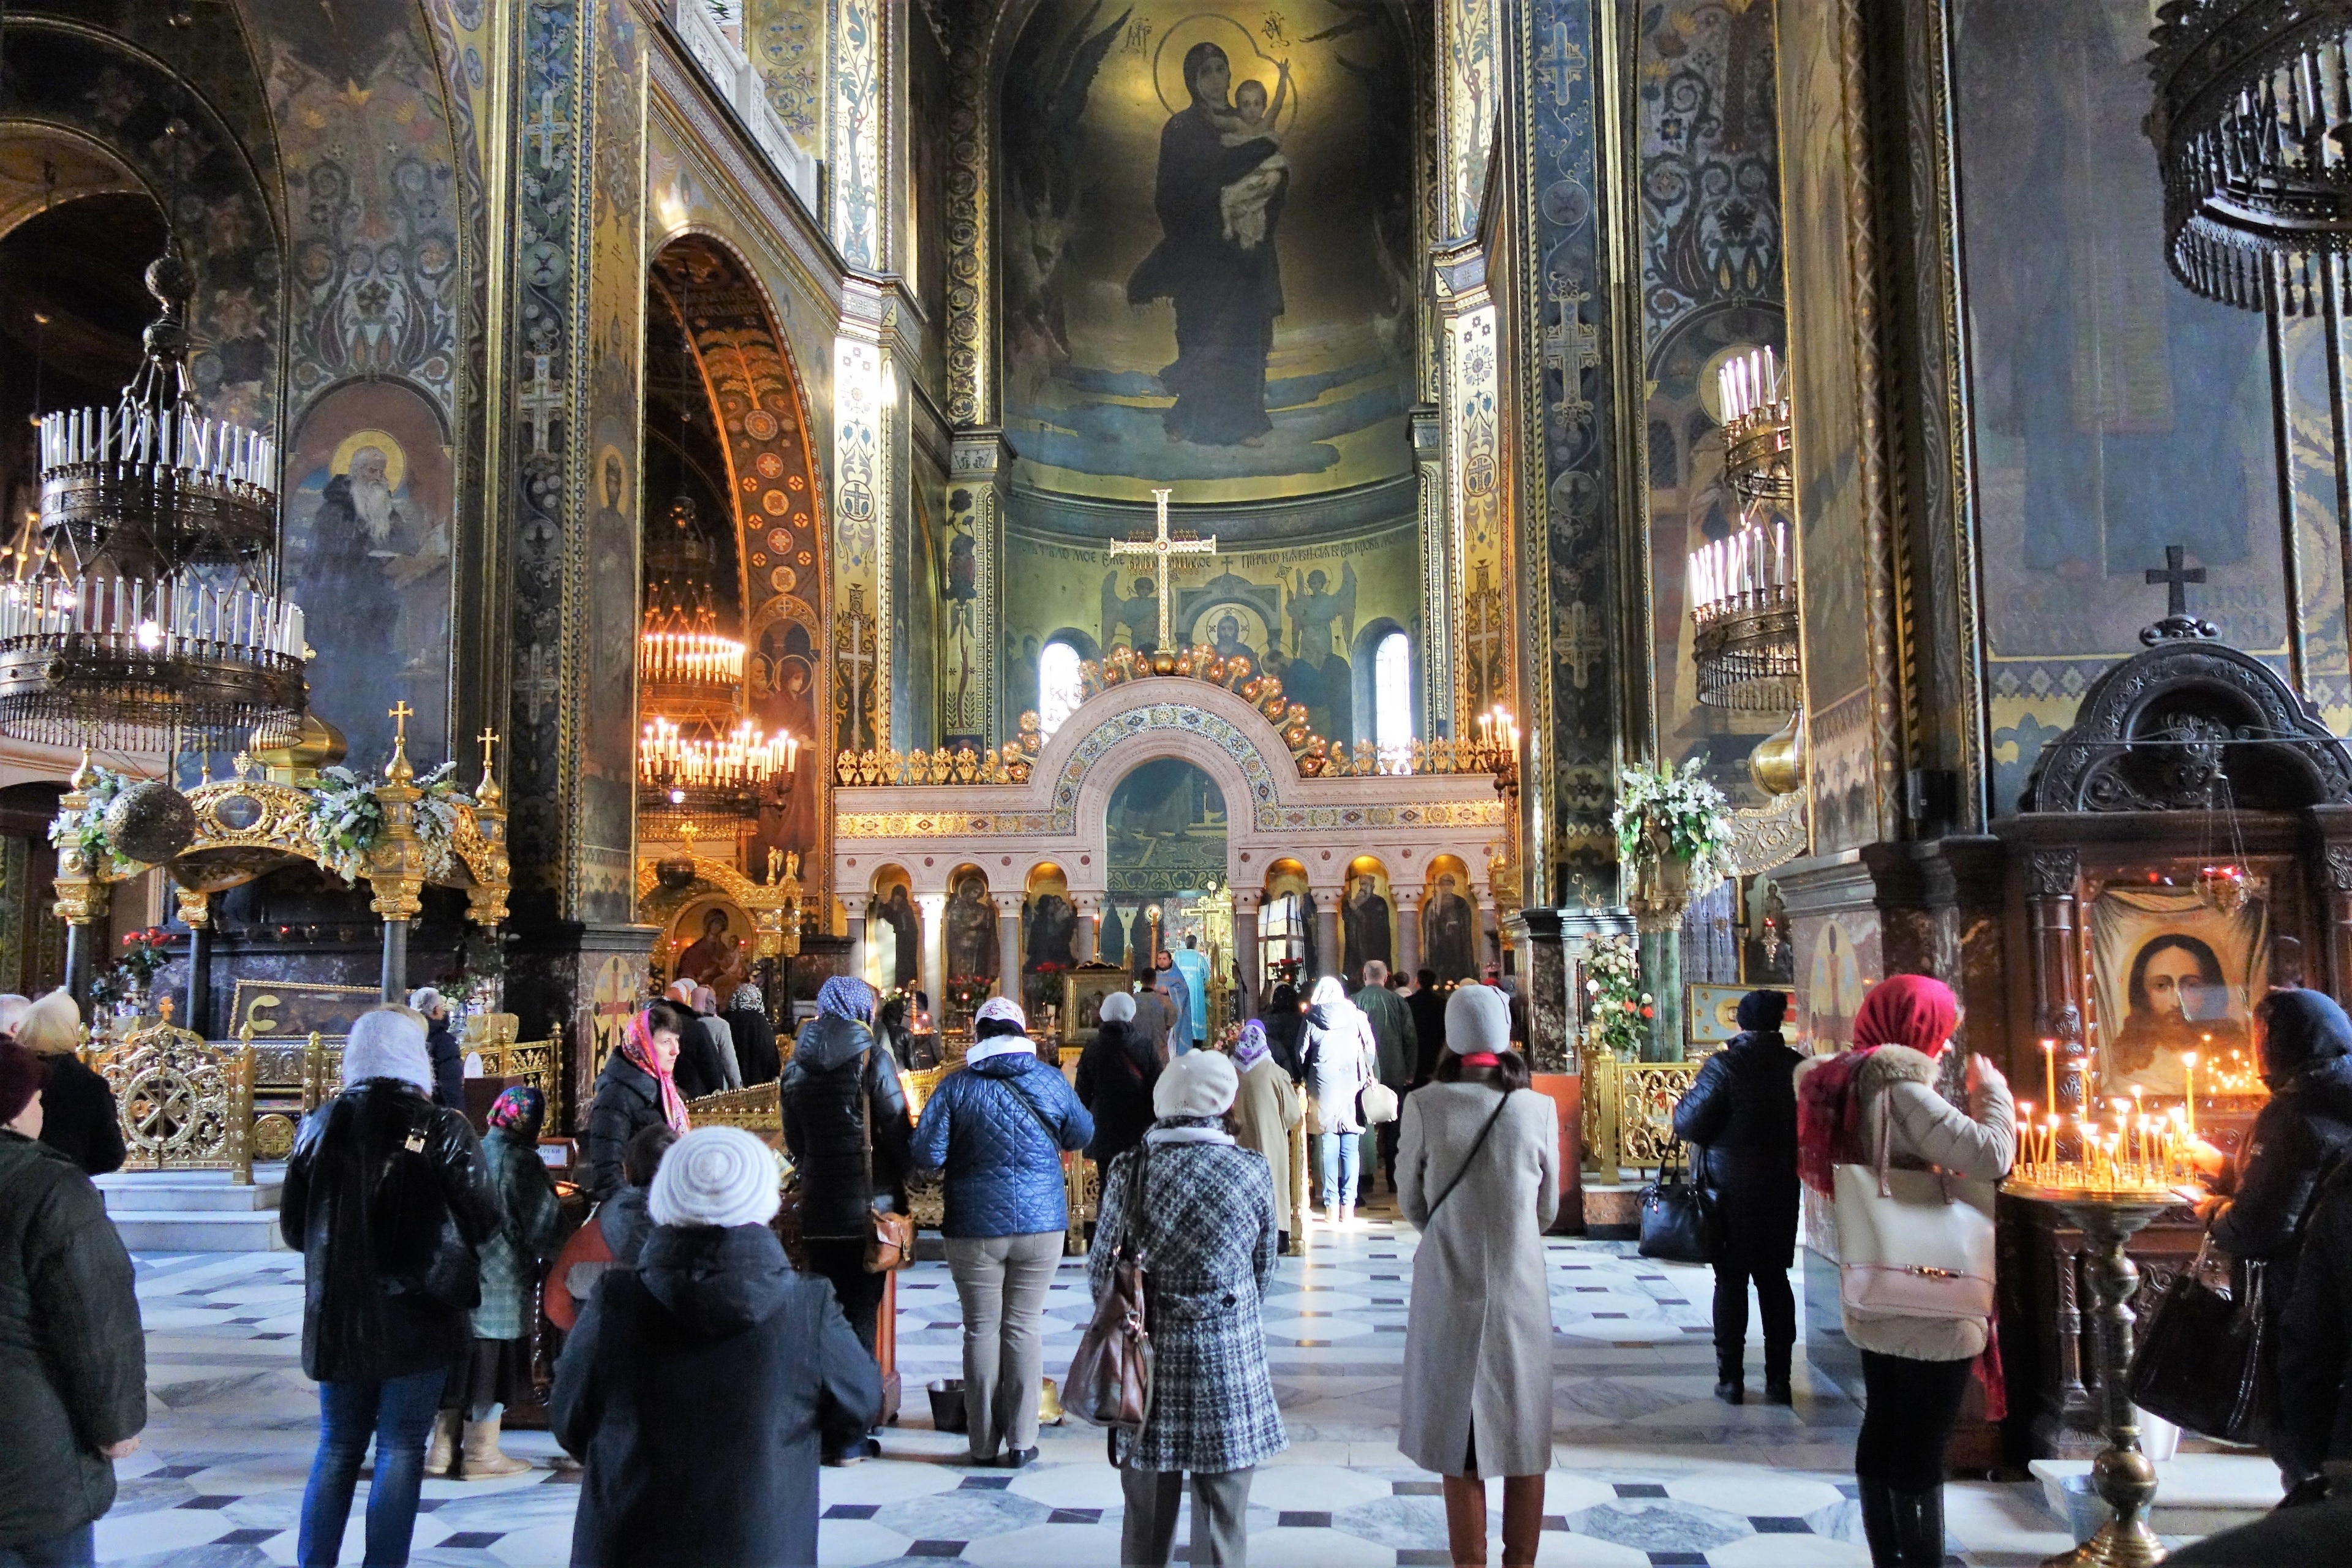 The Saint Vladimir Cathedral has a warm and beautiful interior.